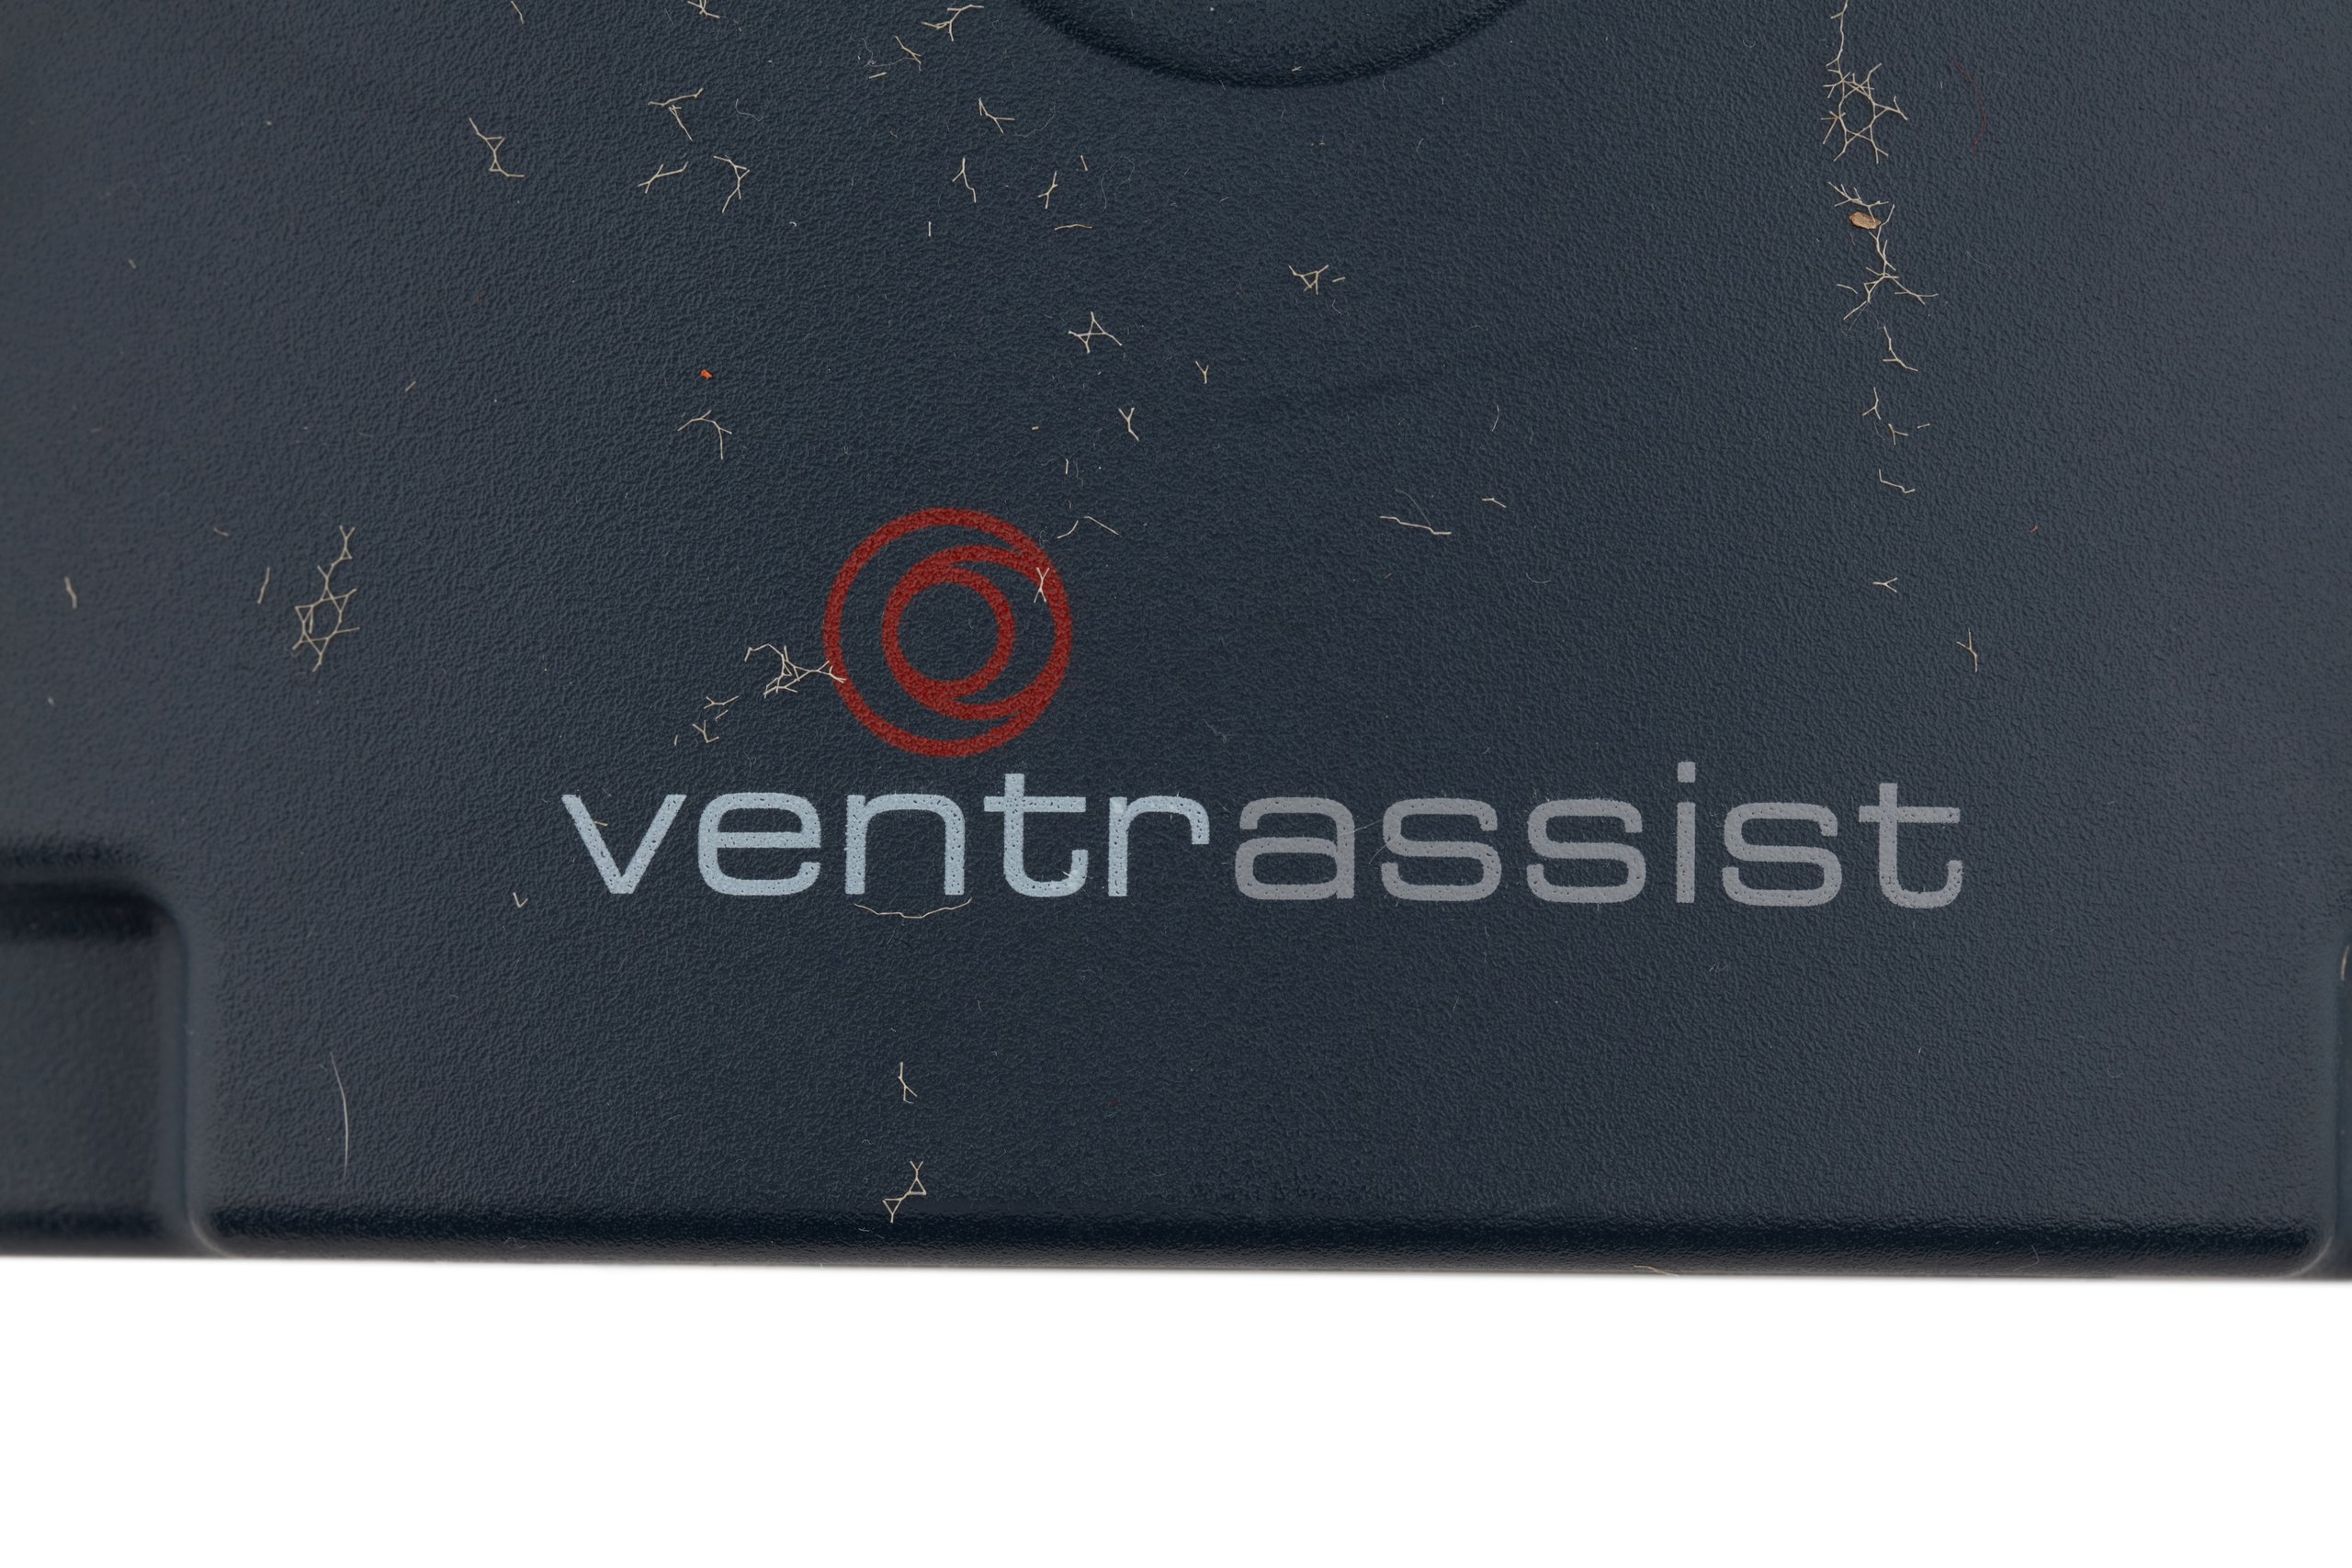 'VentrAssist' implantable blood pump with control box